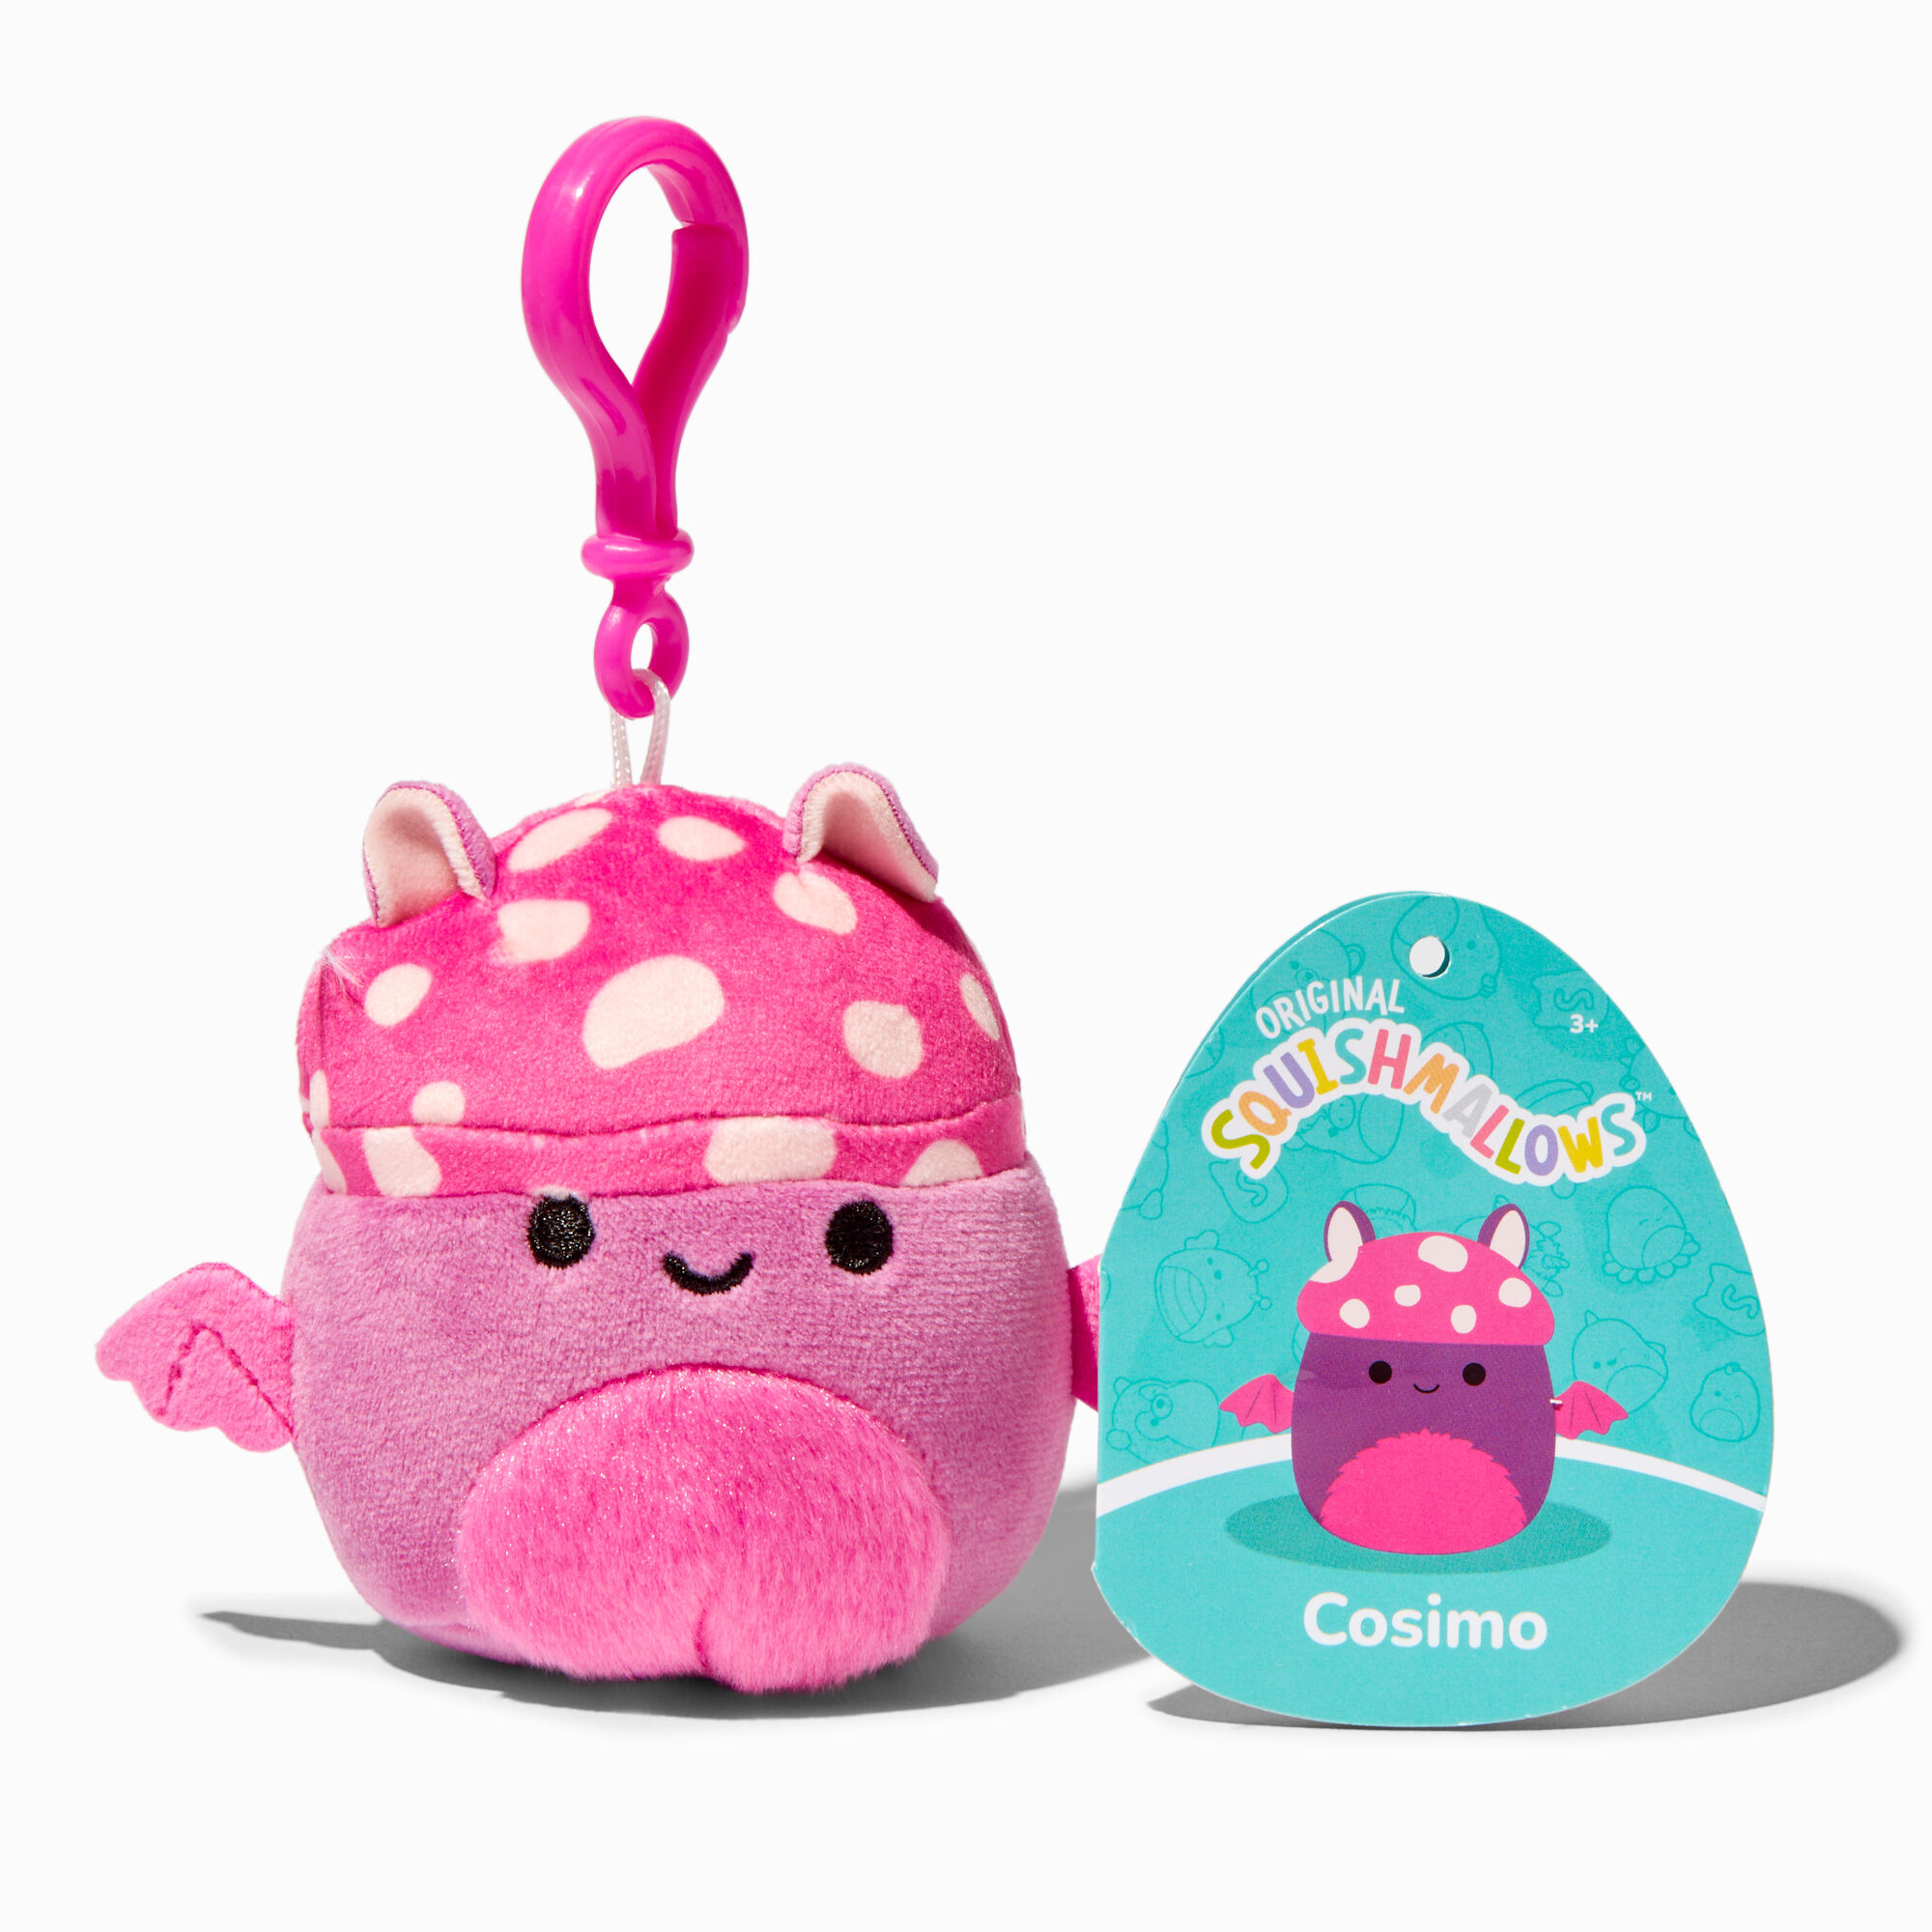 View Claires Squishmallows 35 Cosimo Soft Toy Bag Clip information